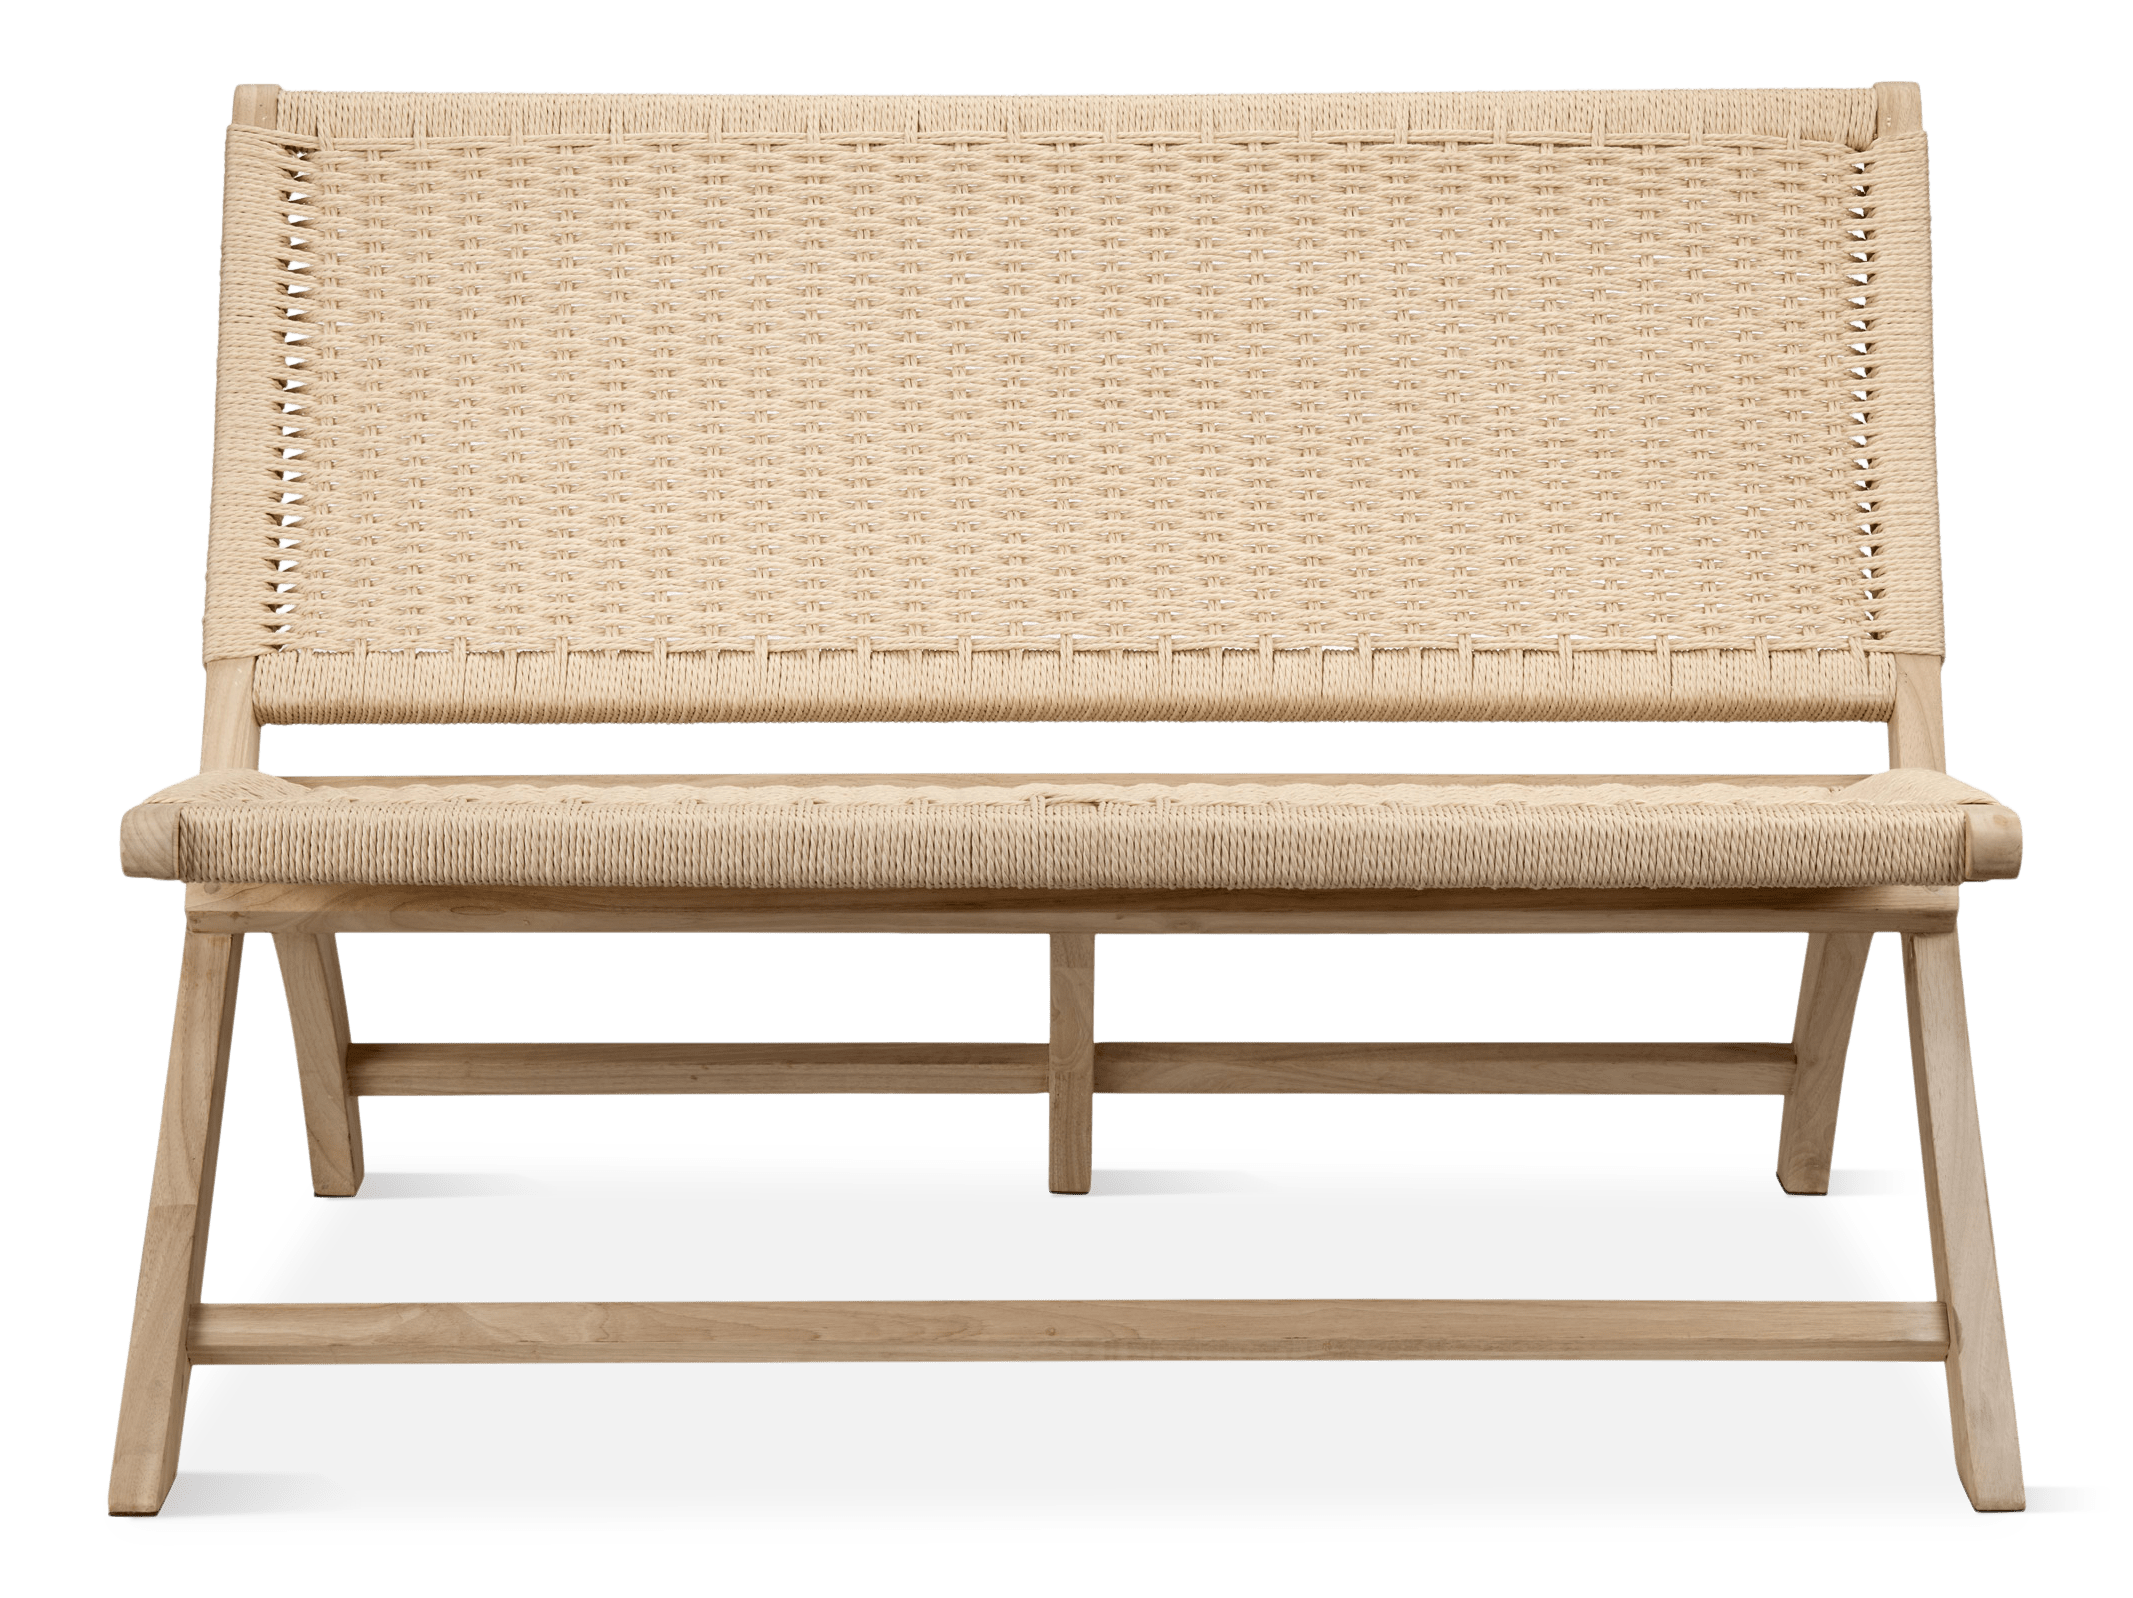 Natural Wood & Woven Rope Folding Bench